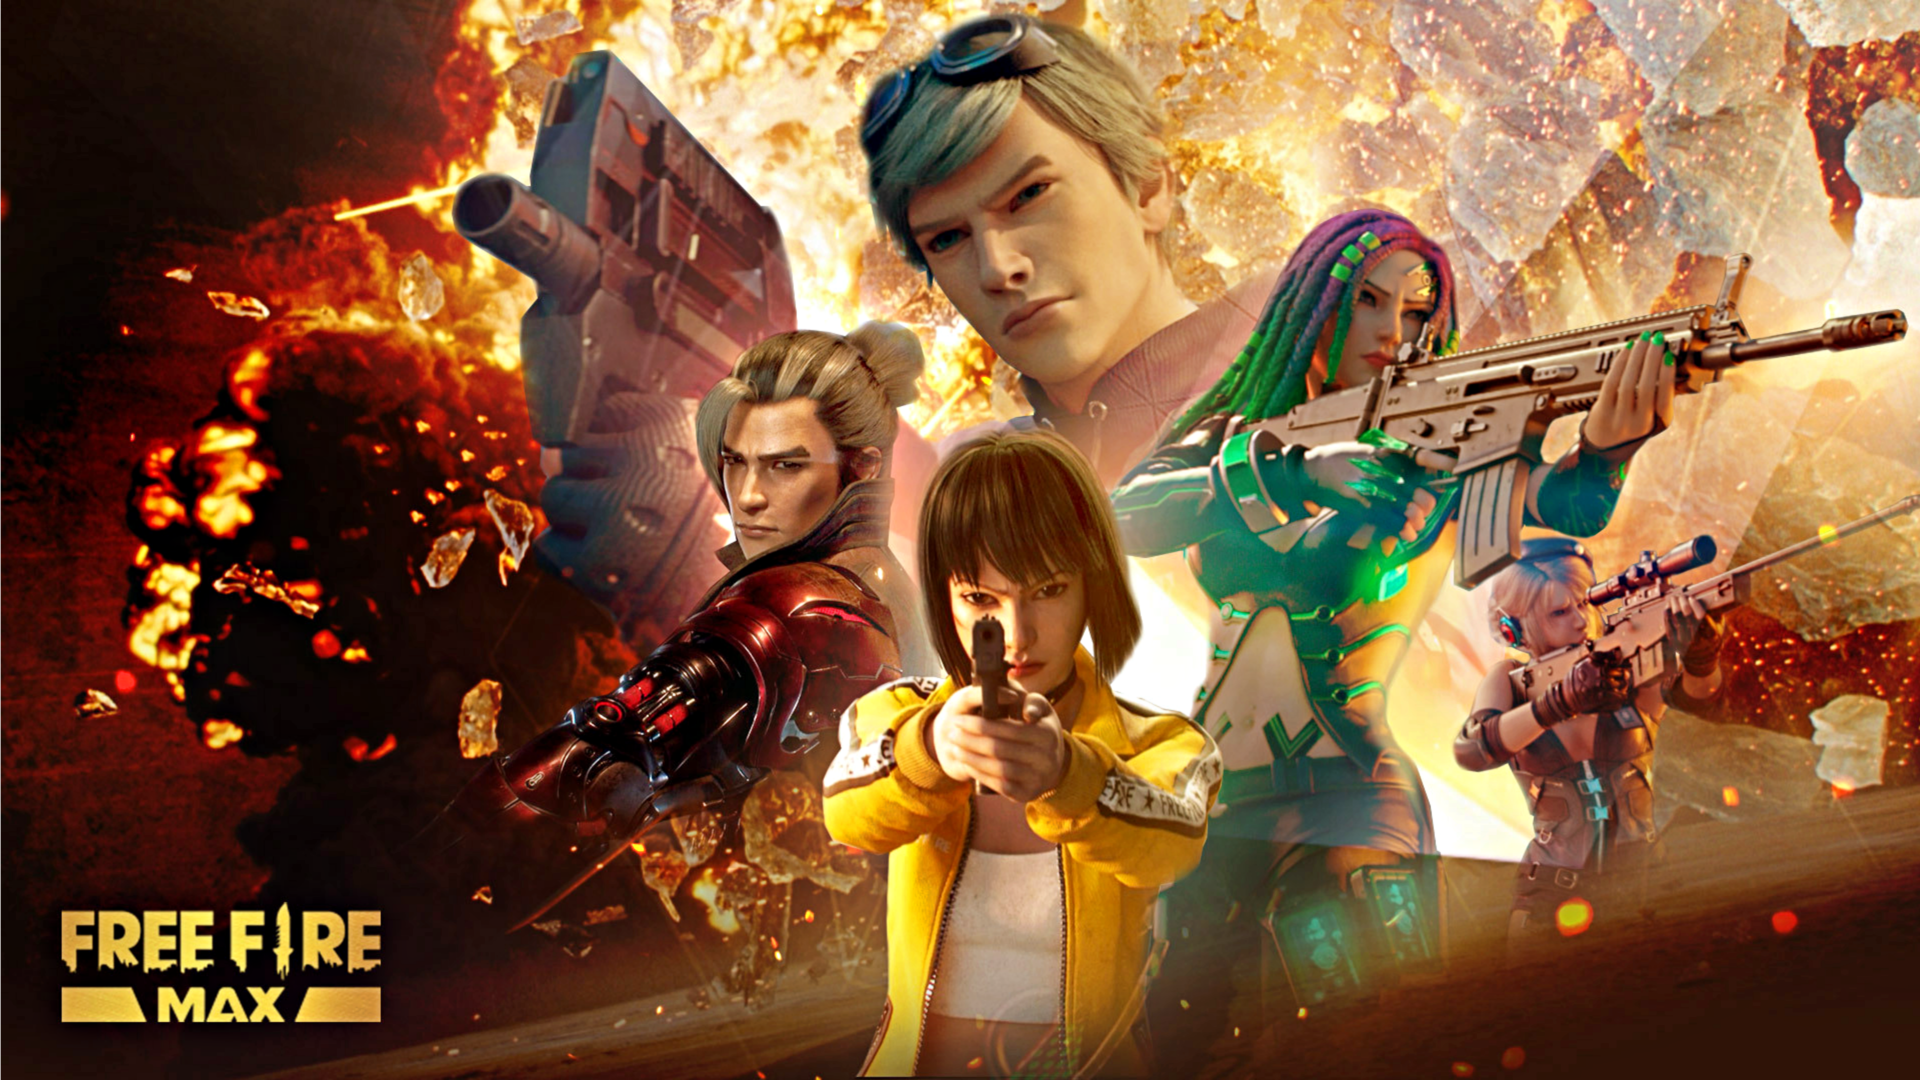 Free Fire MAX's March 17 codes: Get free in-game bonuses